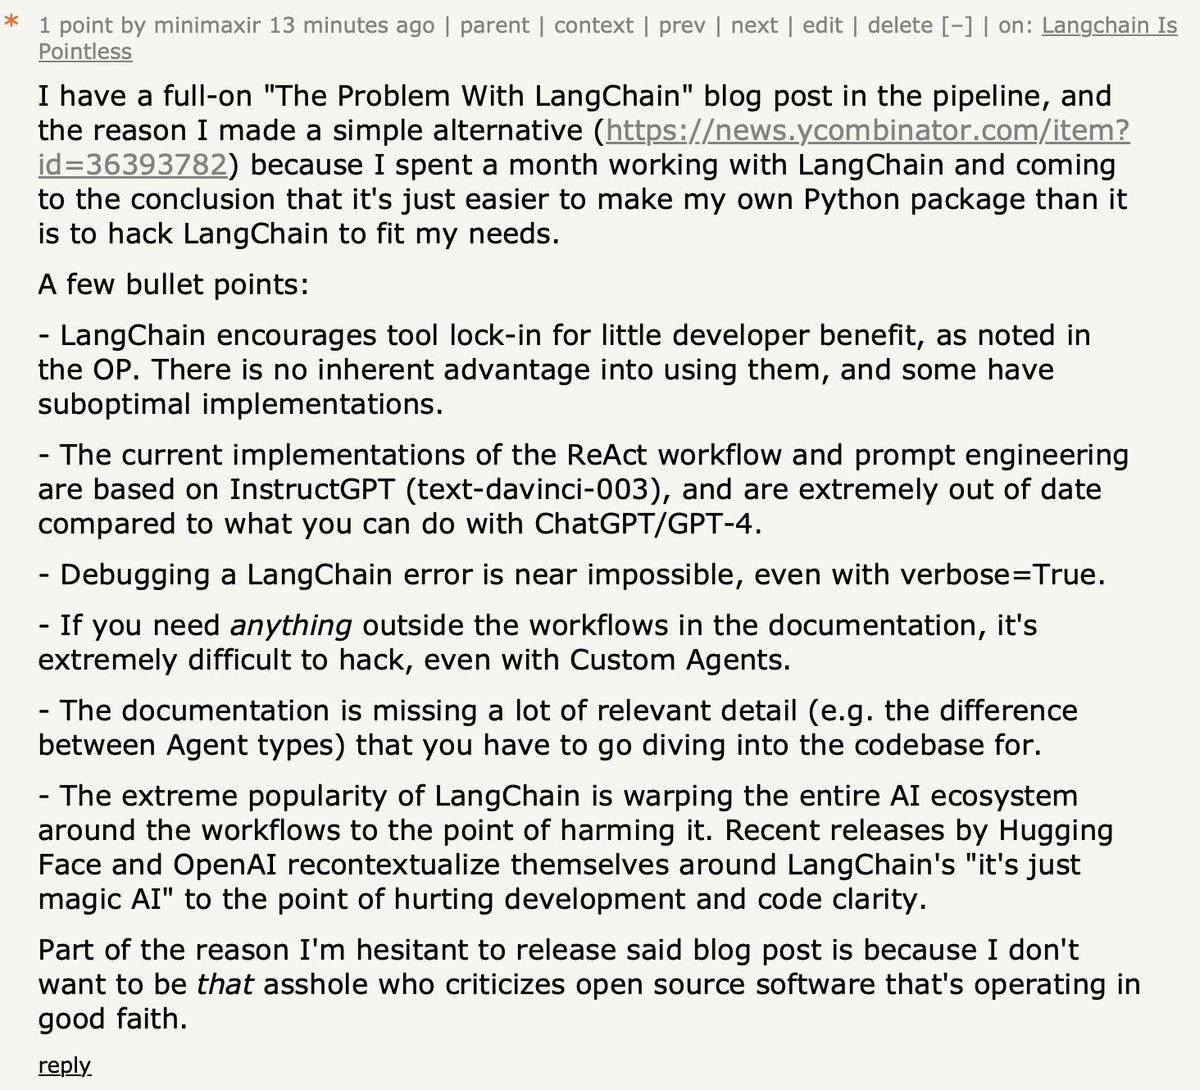 A few bullet points:
- LangChain encourages tool lock-in for little developer benefit, as noted in the OP. There is no inherent advantage into using them, and some have suboptimal implementations.
- The current implementations of the ReAct workflow and prompt engineering are based on InstructGPT (text-davinci-003), and are extremely out of date compared to what you can do with ChatGPT/GPT-4.
- Debugging a LangChain error is near impossible, even with verbose=True.
- If you need anything outside the workflows in the documentation, it's extremely difficult to hack, even with Custom Agents.
- The documentation is missing a lot of relevant detail (e.g. the difference between Agent types) that you have to go diving into the codebase for.
- The extreme popularity of LangChain is warping the entire AI ecosystem around the workflows to the point of harming it. Recent releases by Hugging Face and OpenAI recontextualize themselves around LangChain's "it's just magic AI" to the point of hurting 